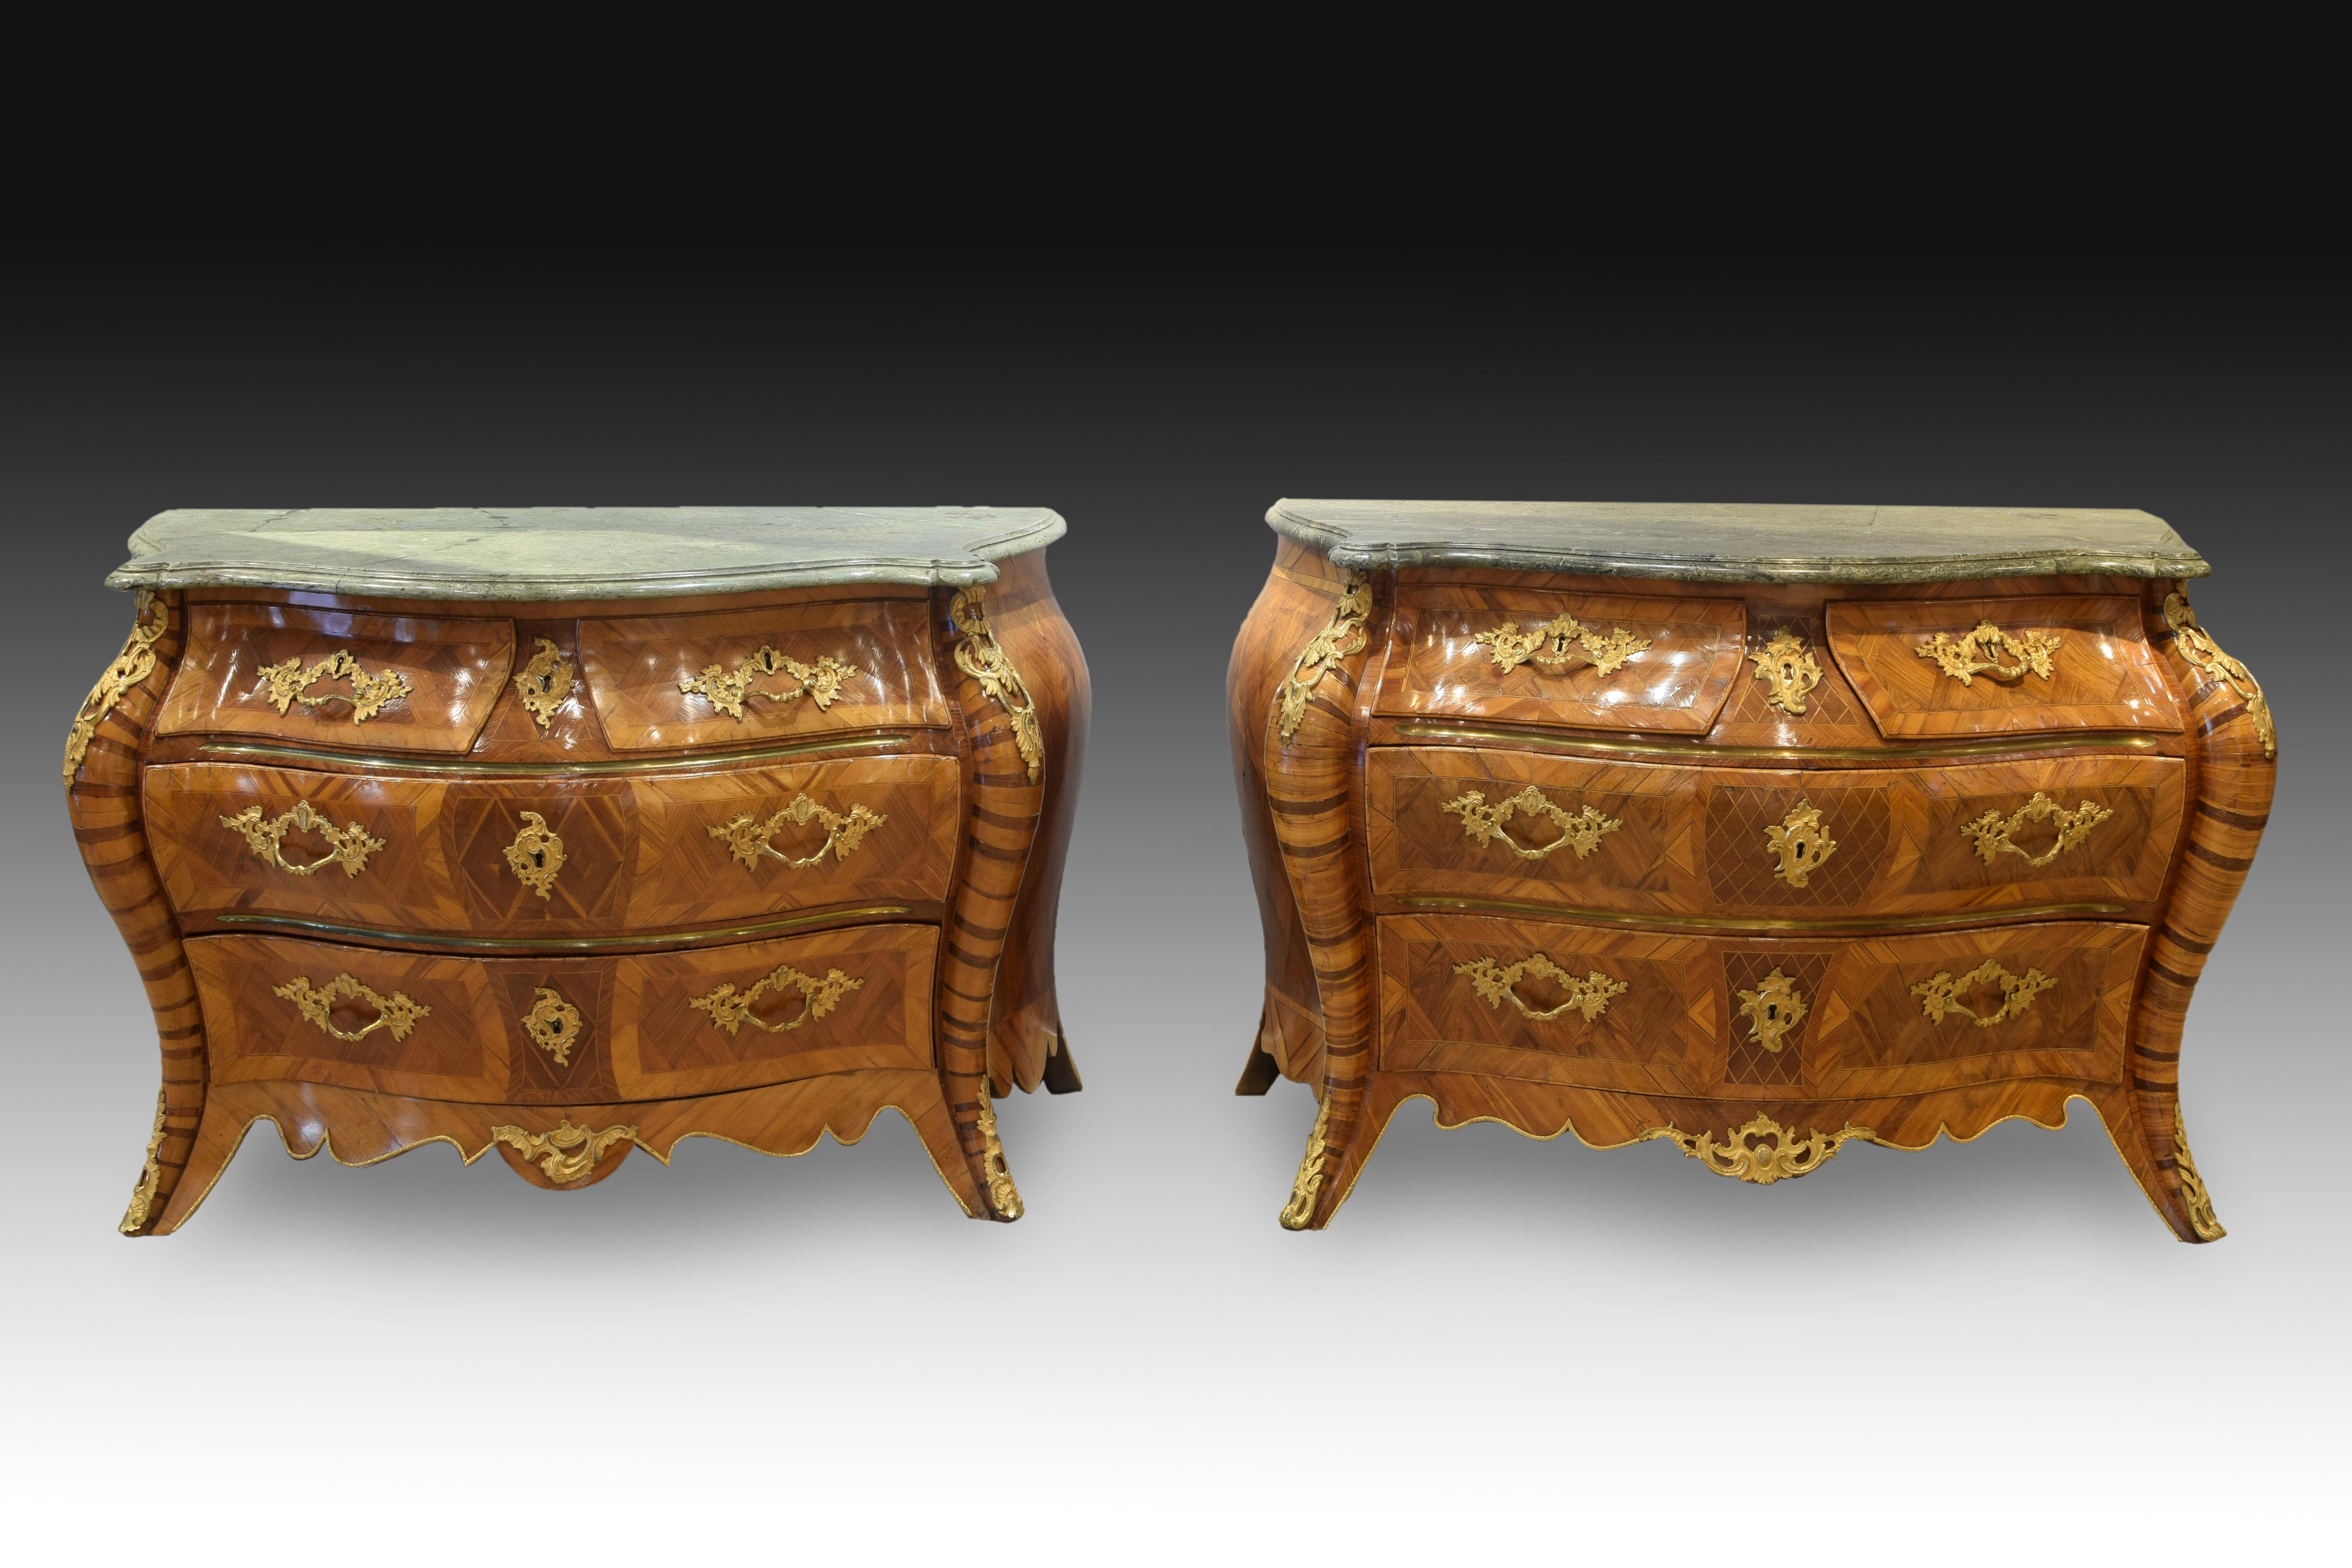 Wood (violet wood, rosewood, amaranth, boxwood, fruit), marble, bronze, Sweden, 18th century. Couple of comfortable almost identical decorated, each one, with a marquetry of geometric shapes combining different woods (violet wood, rosewood,